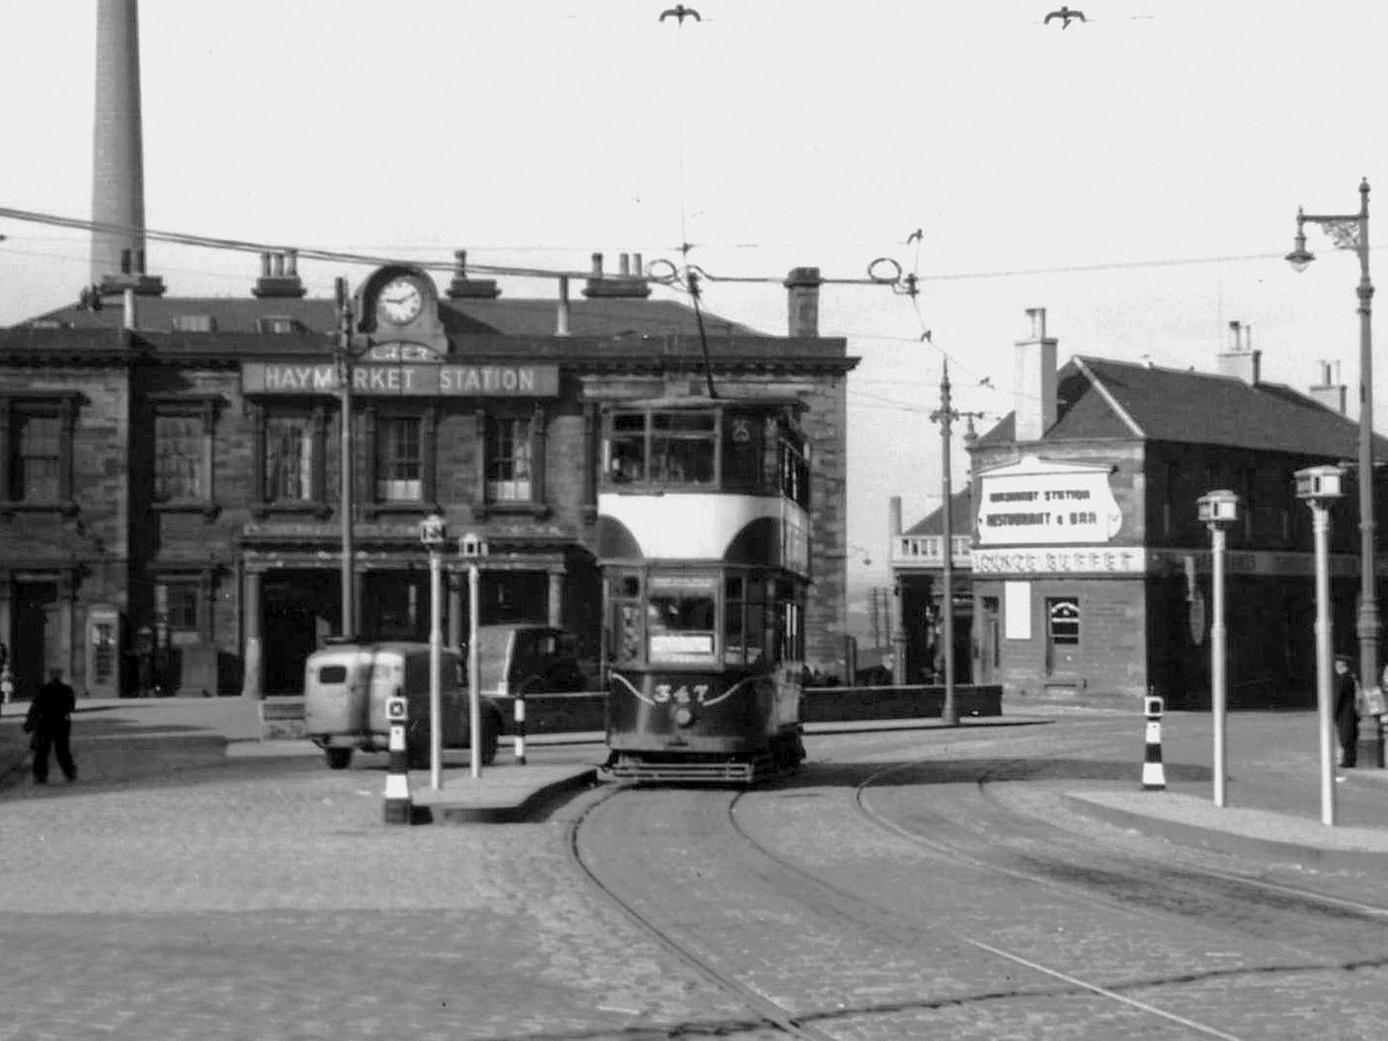 Haymarket Station has undergone a massive redevelopment since Tram 347 passed by. The restaurant on the right was demolished to make way for the new tram stop and extension of the station itself.